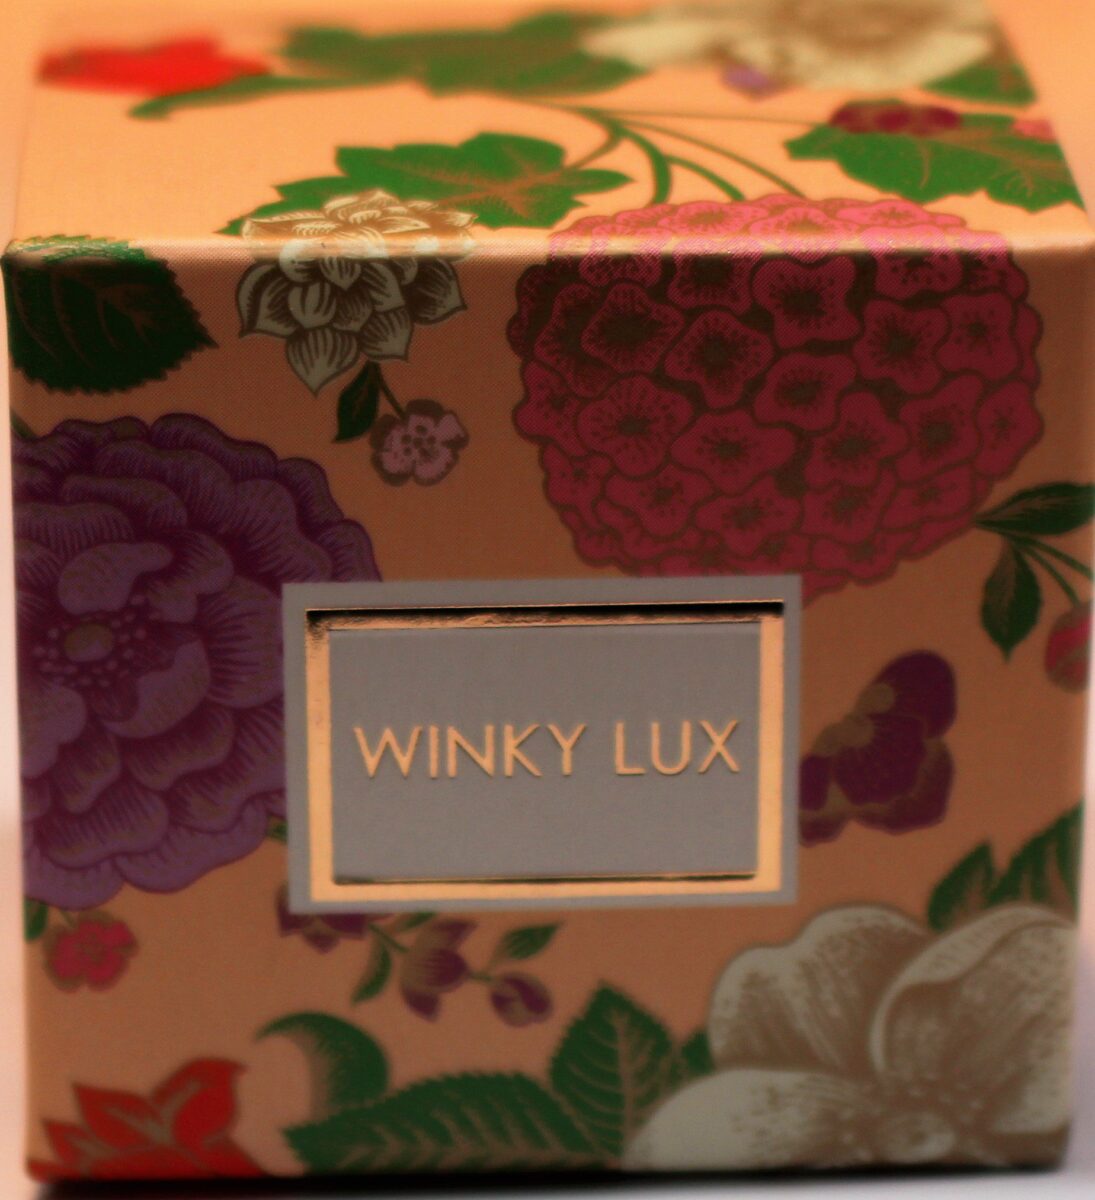 Winky-lux-whipped=cream-primer